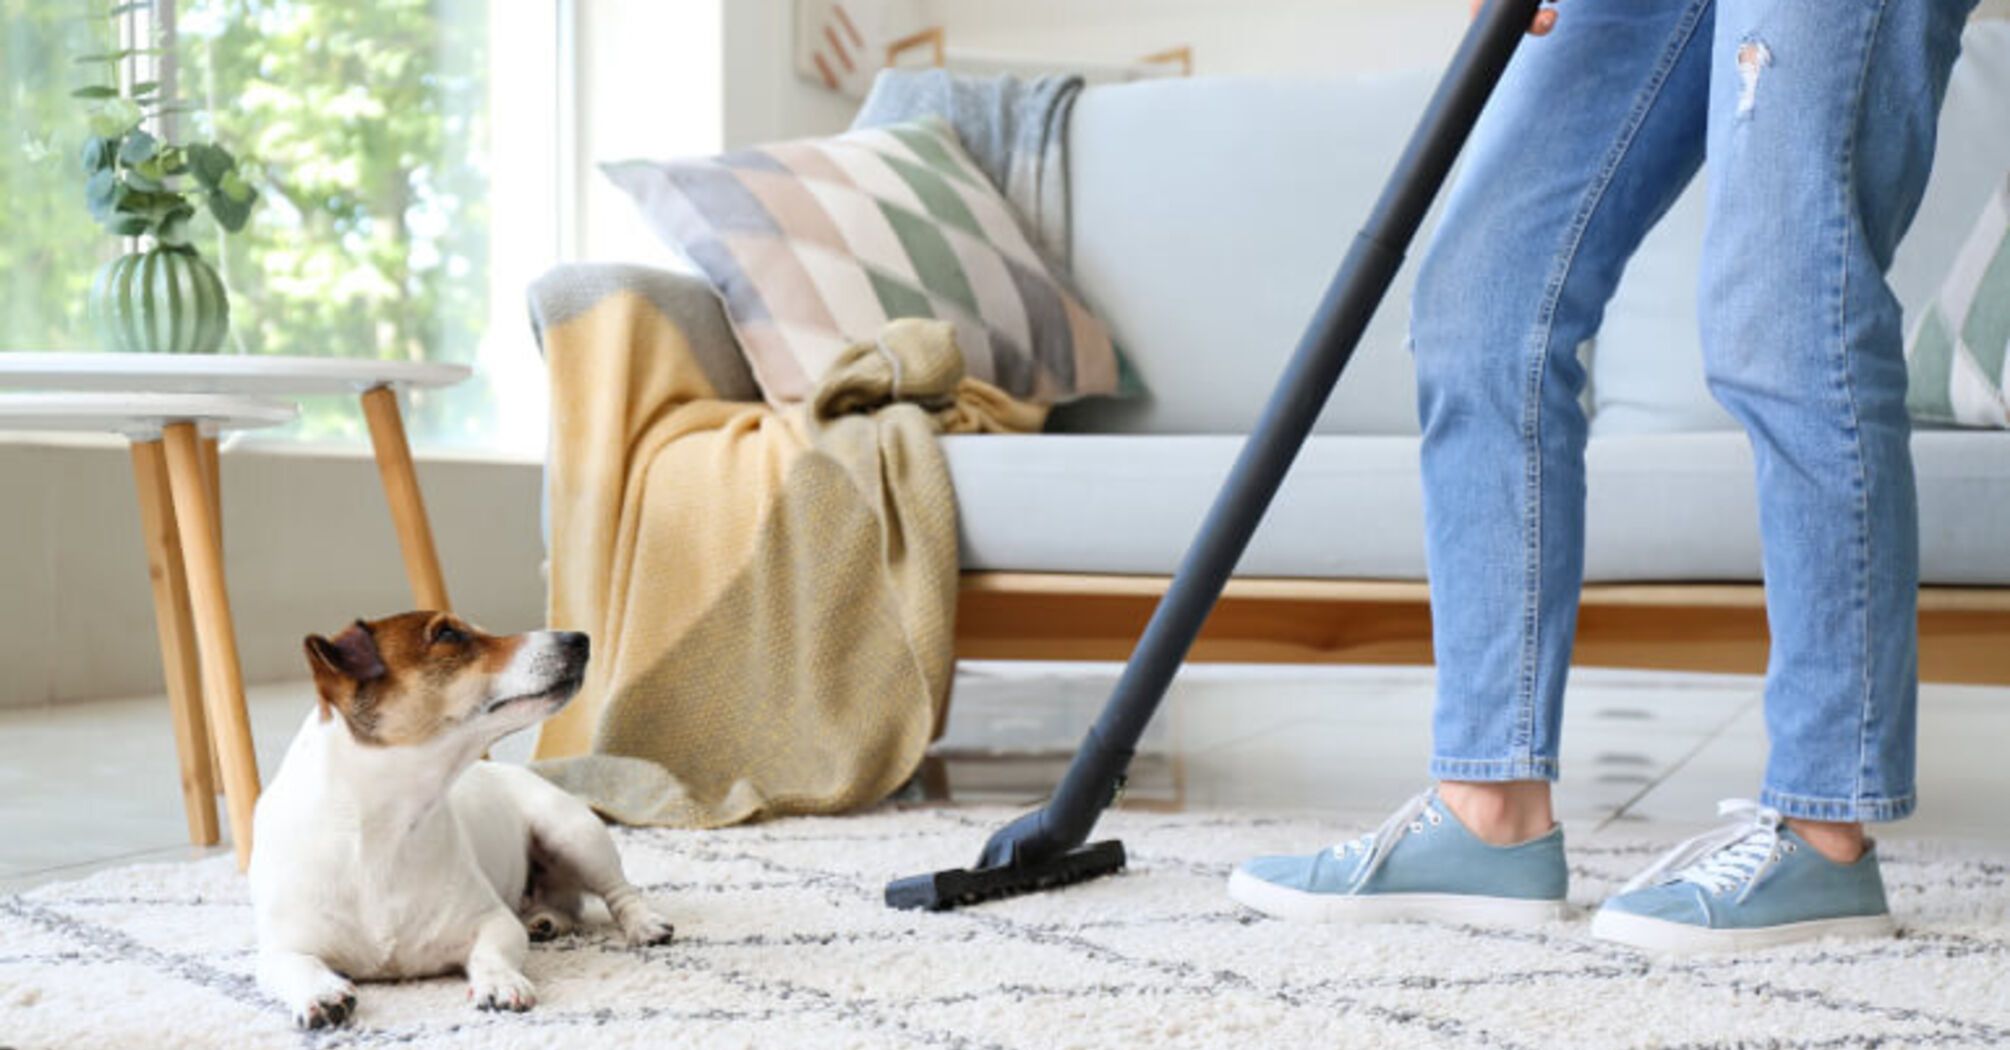 How to get rid of pet hair on carpets and furniture